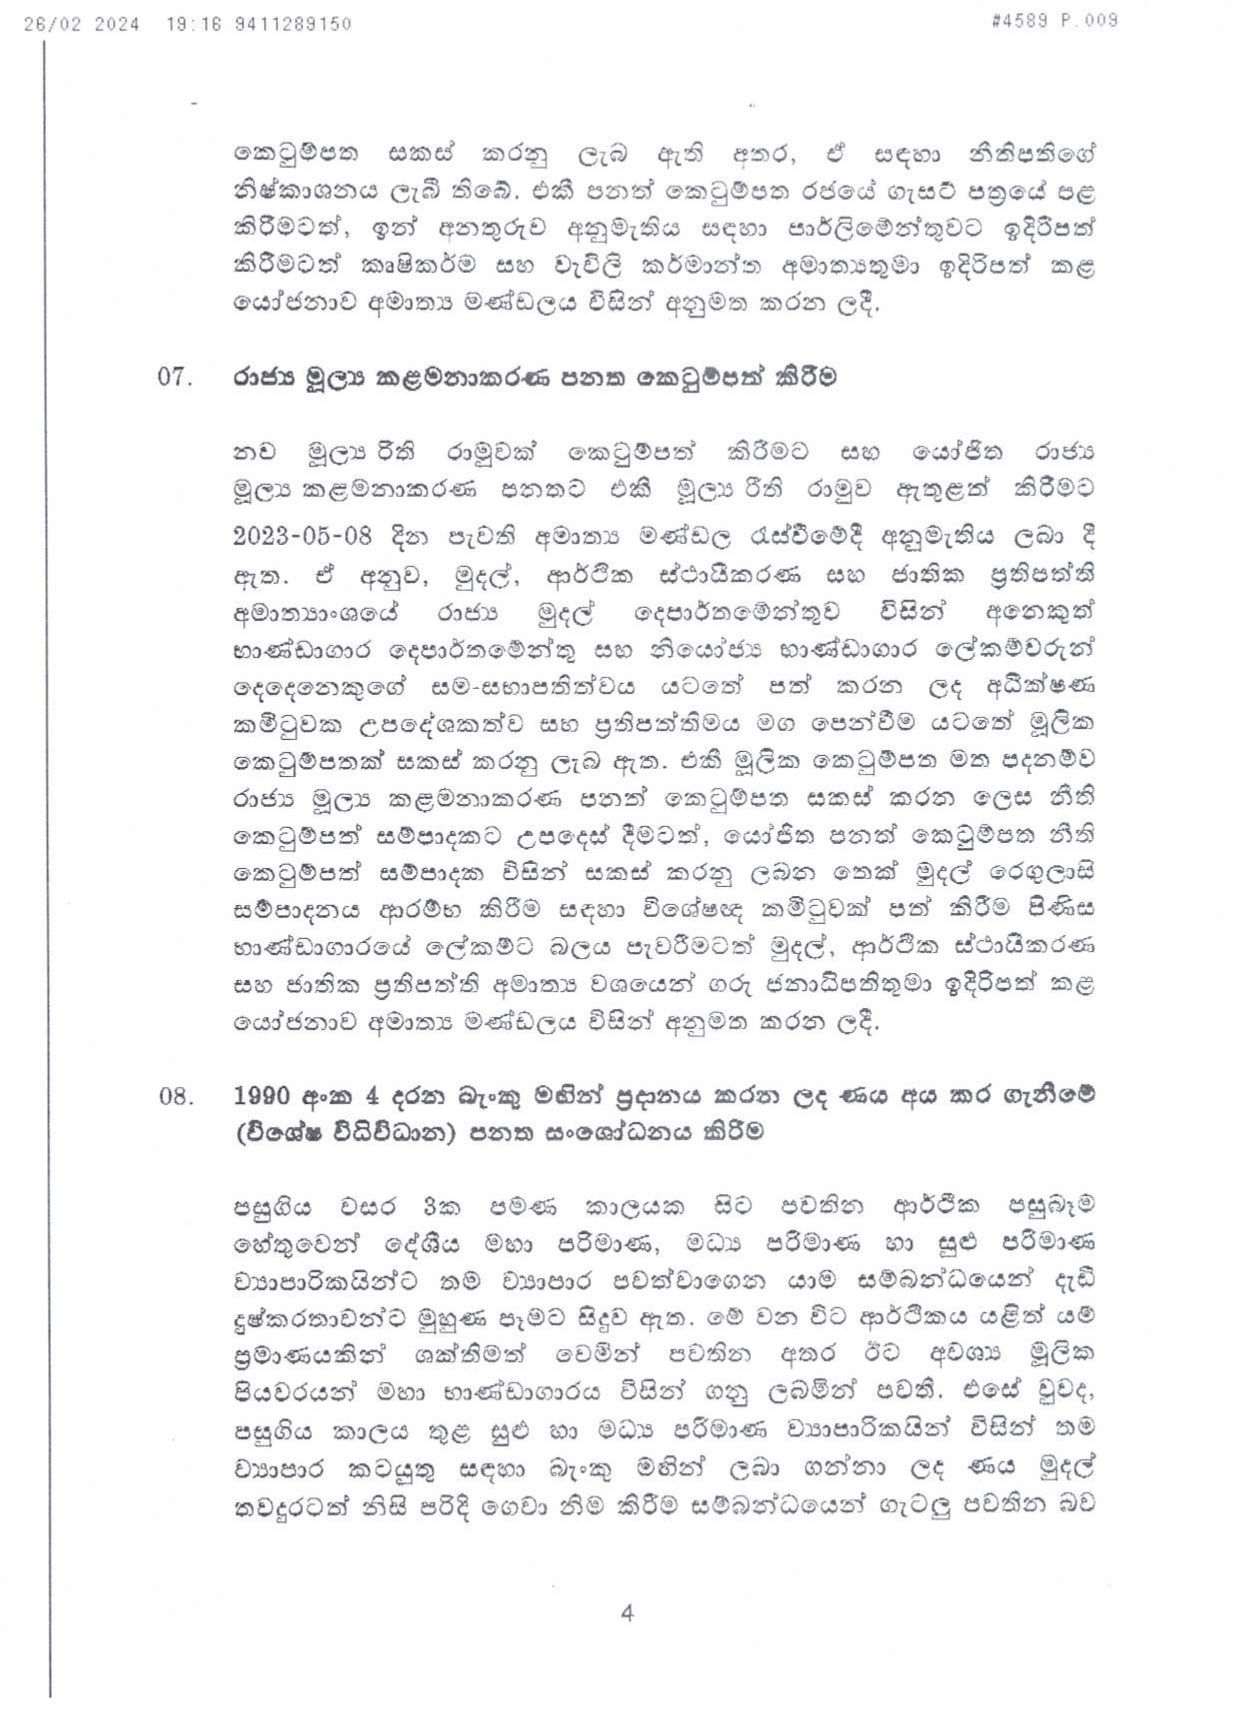 Cabinet Decision on 26.02.2024 page 00041